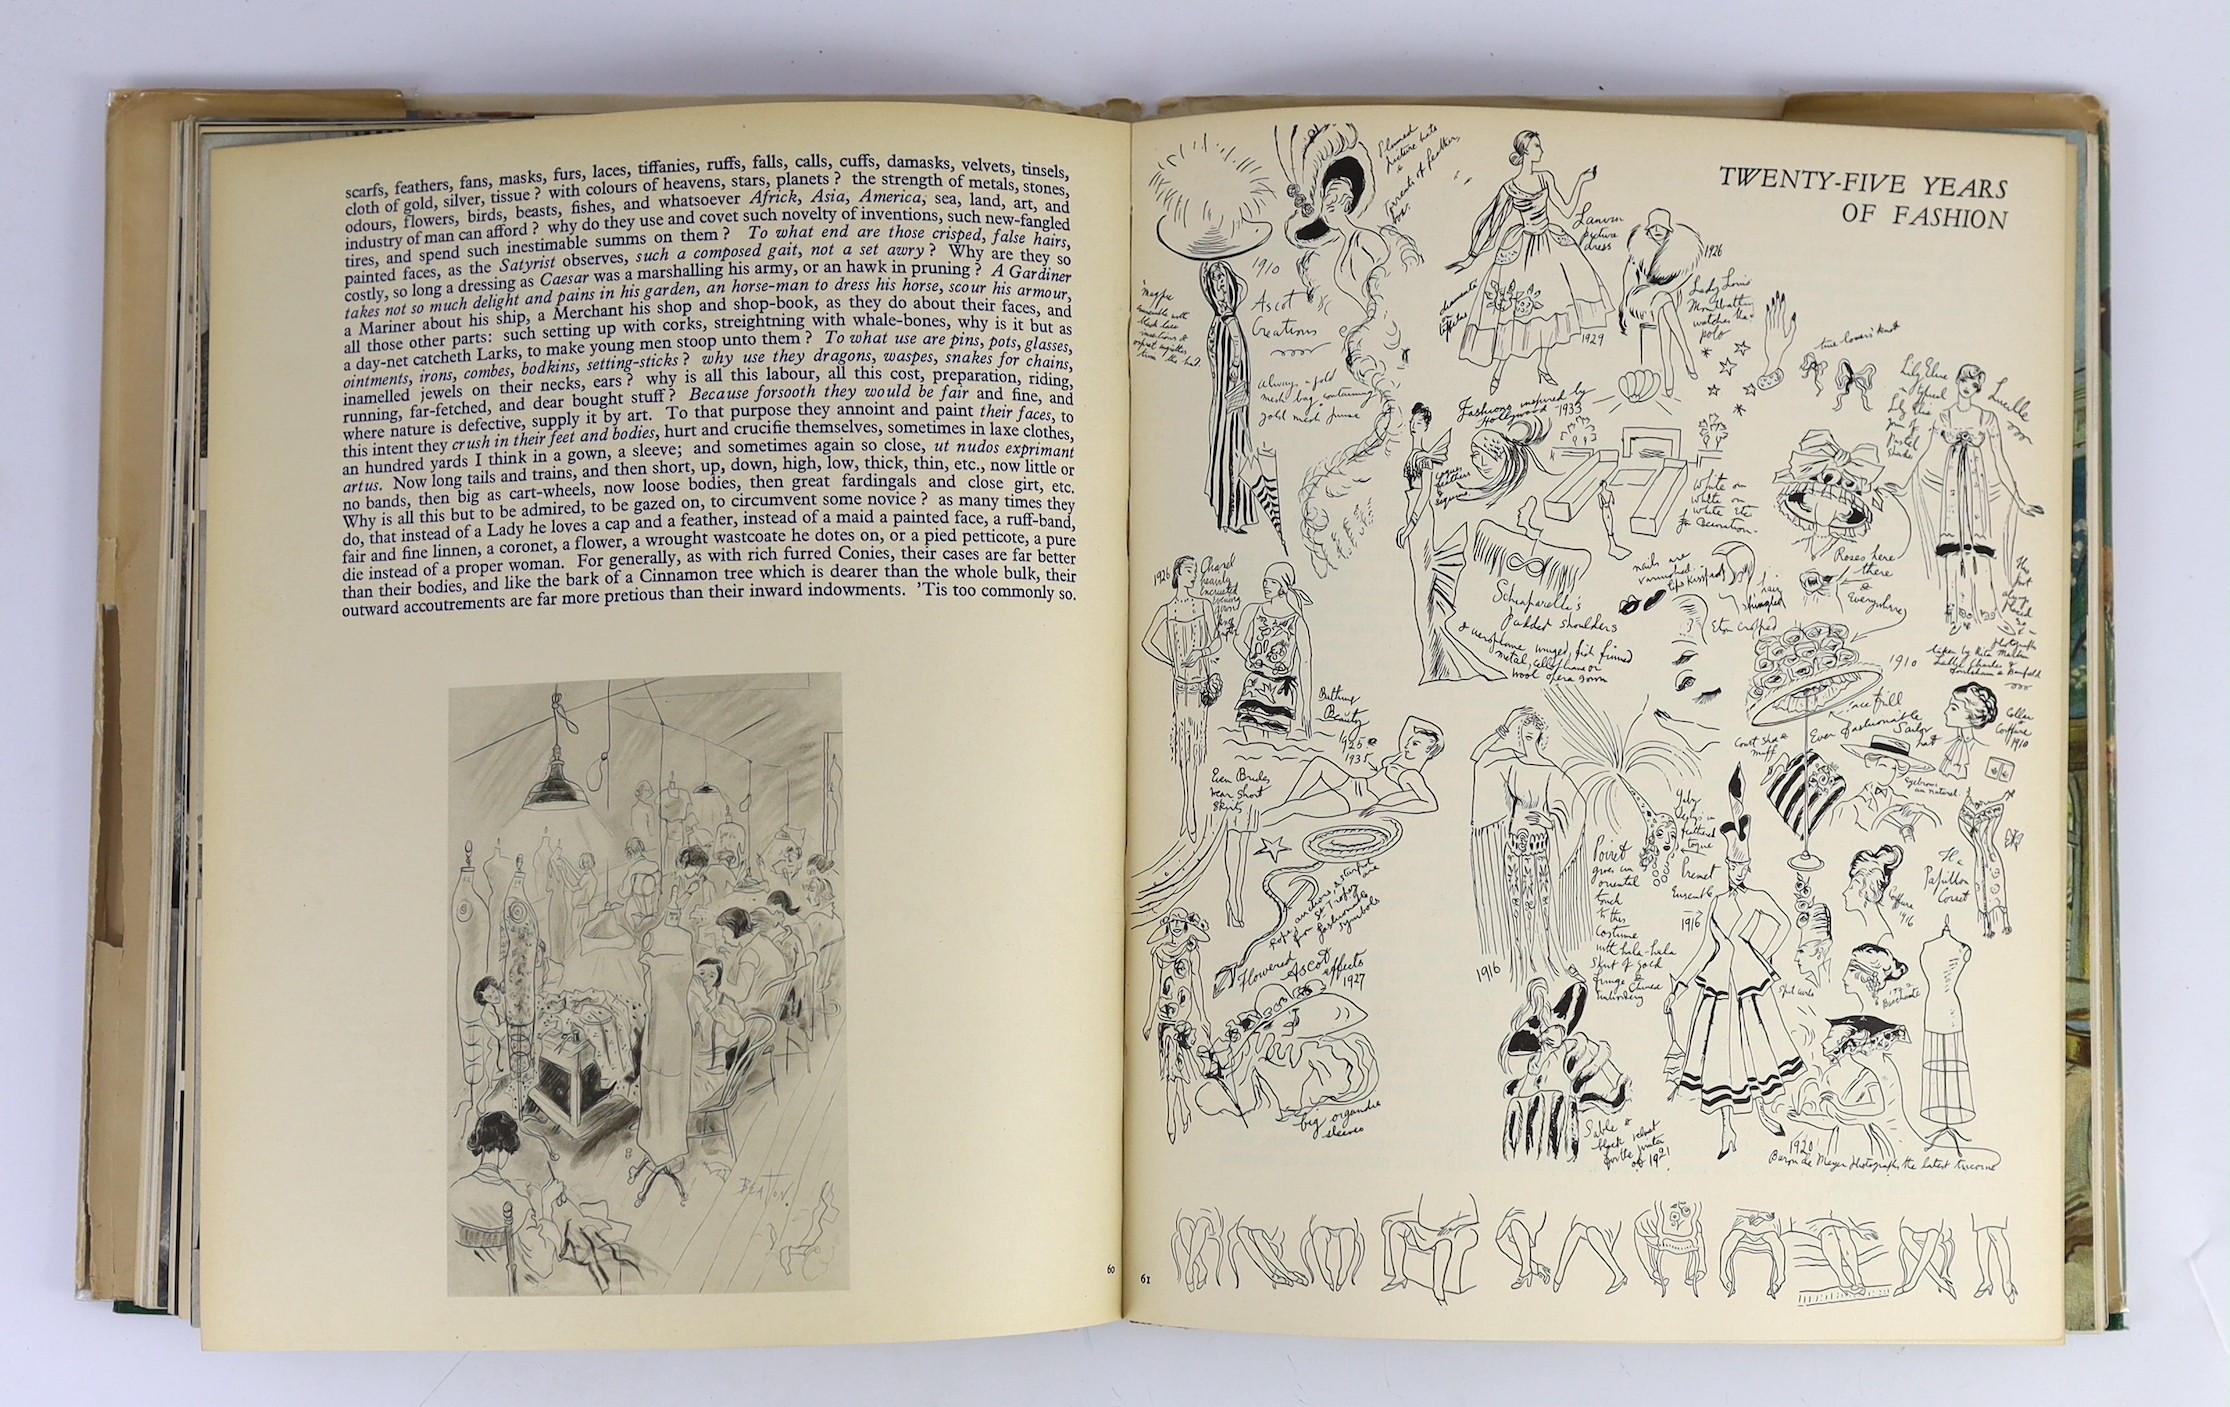 ° ° Beaton, Cecil - Cecil Beaton's Scrapbook. First Edition - inscribed by author to the 'high' - Image 5 of 6